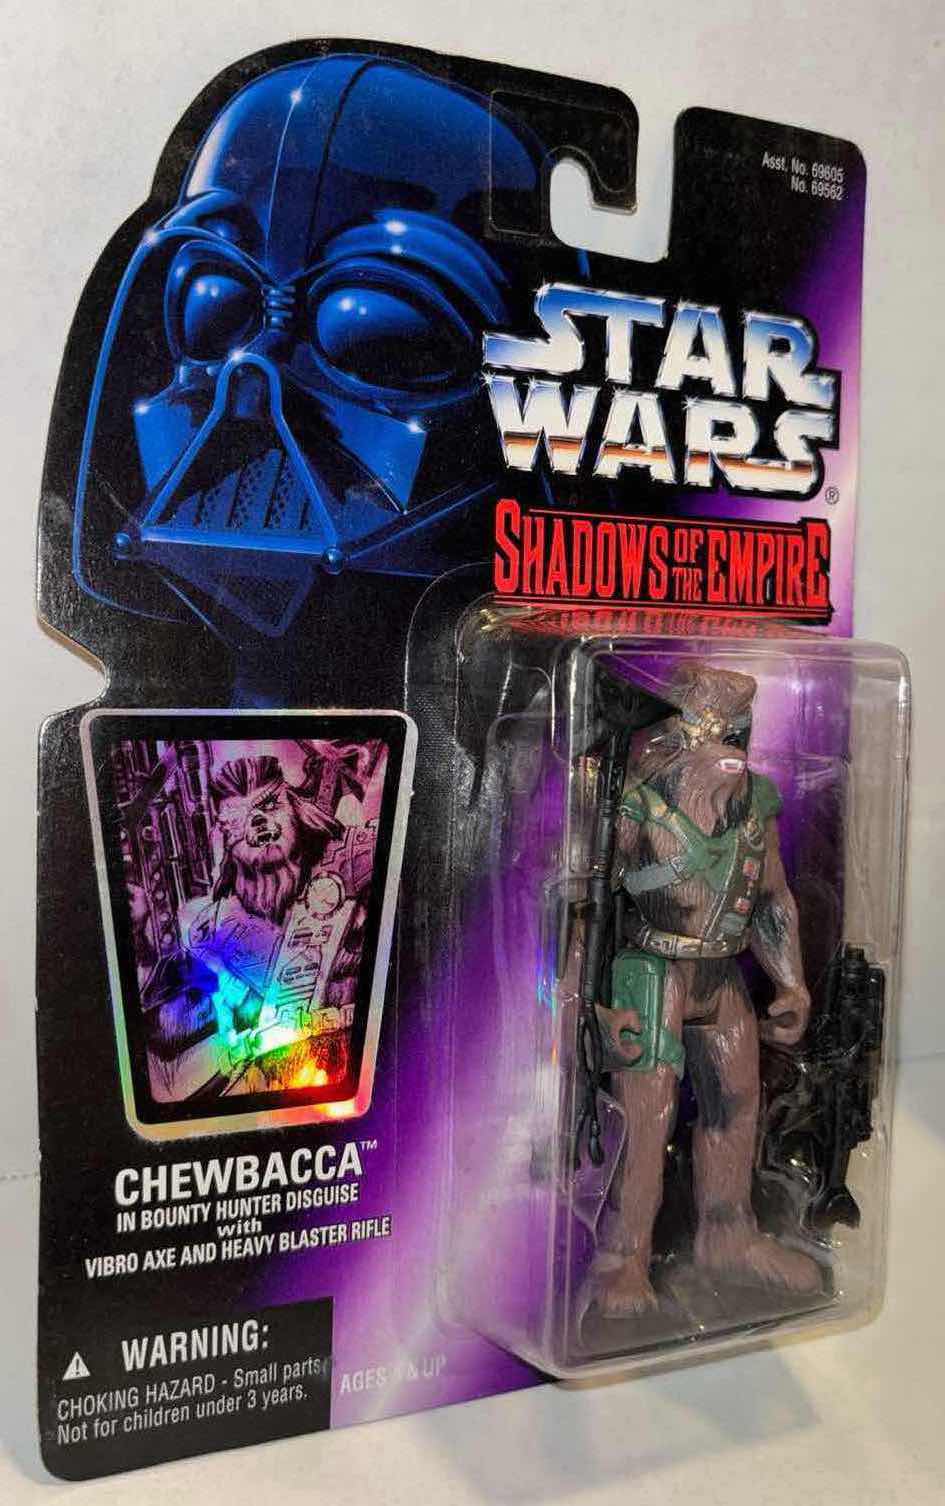 Photo 2 of NEW MINT COND 1996 HASBRO KENNER STAR WARS 3-PACK BUNDLE, SHADOWS OF THE EMPIRE “CHEWBACCA”, “LEIA” & “LUKE SKYWALKER” IN CLEAR CLAMSHELL PACKAGING